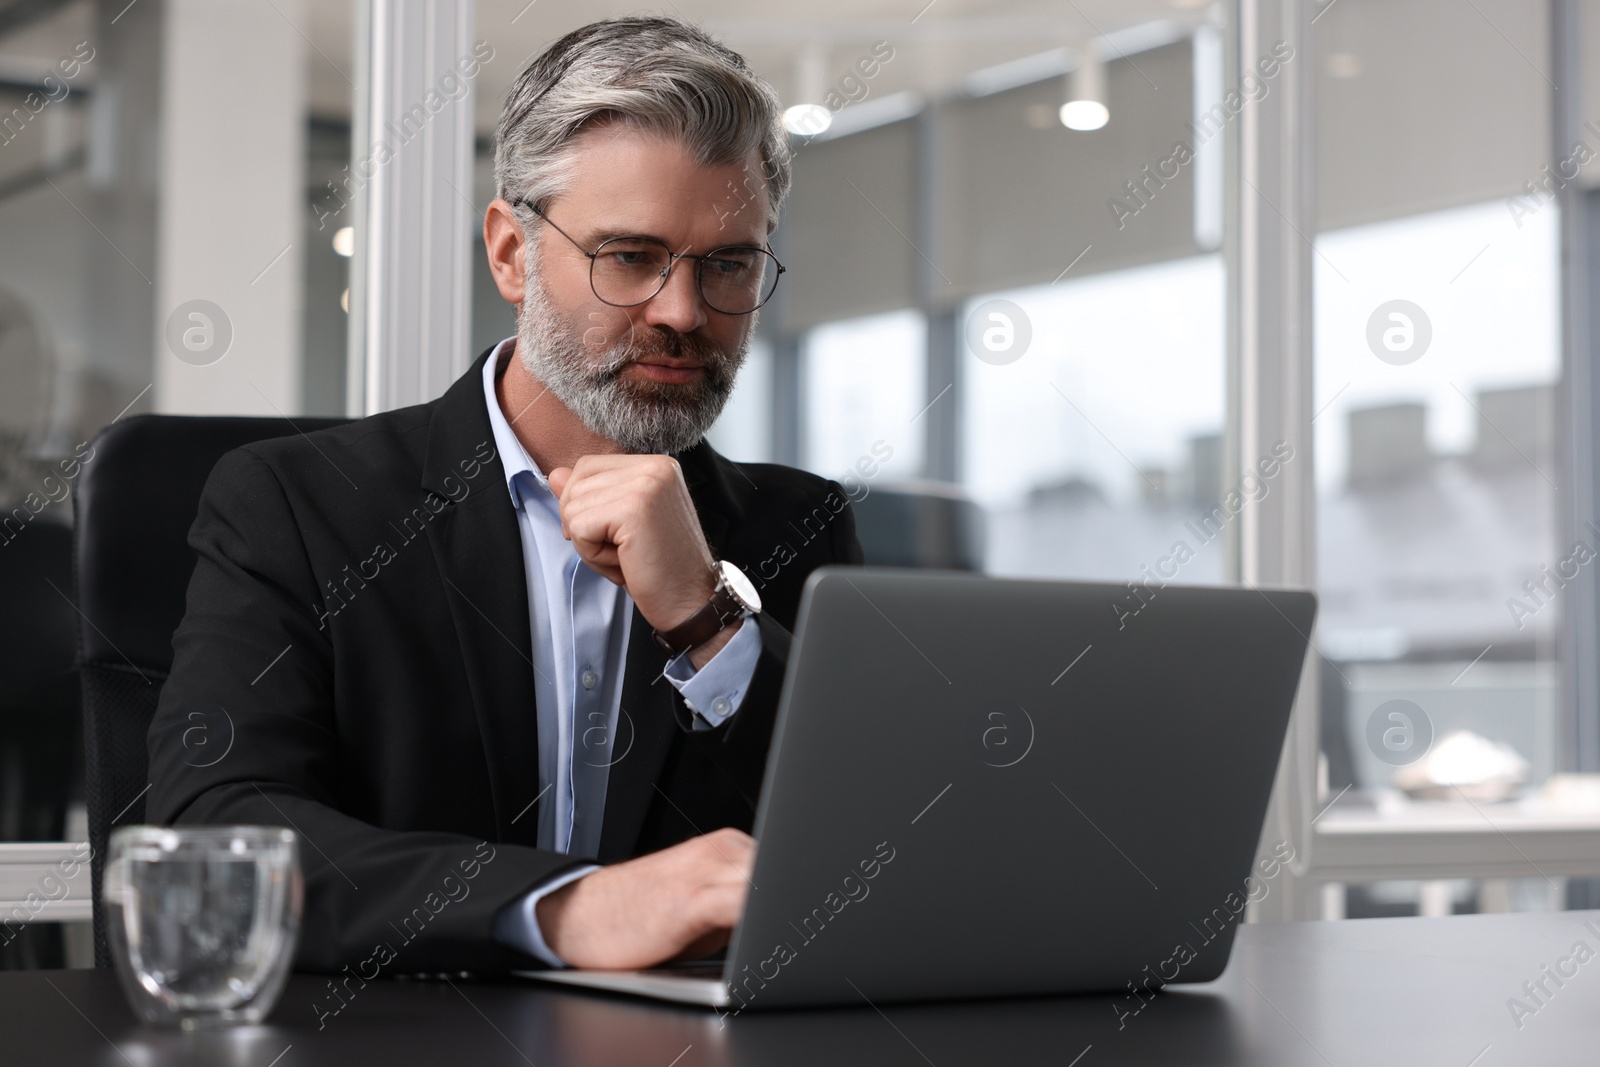 Photo of Handsome man working with laptop at table in office. Lawyer, businessman, accountant or manager